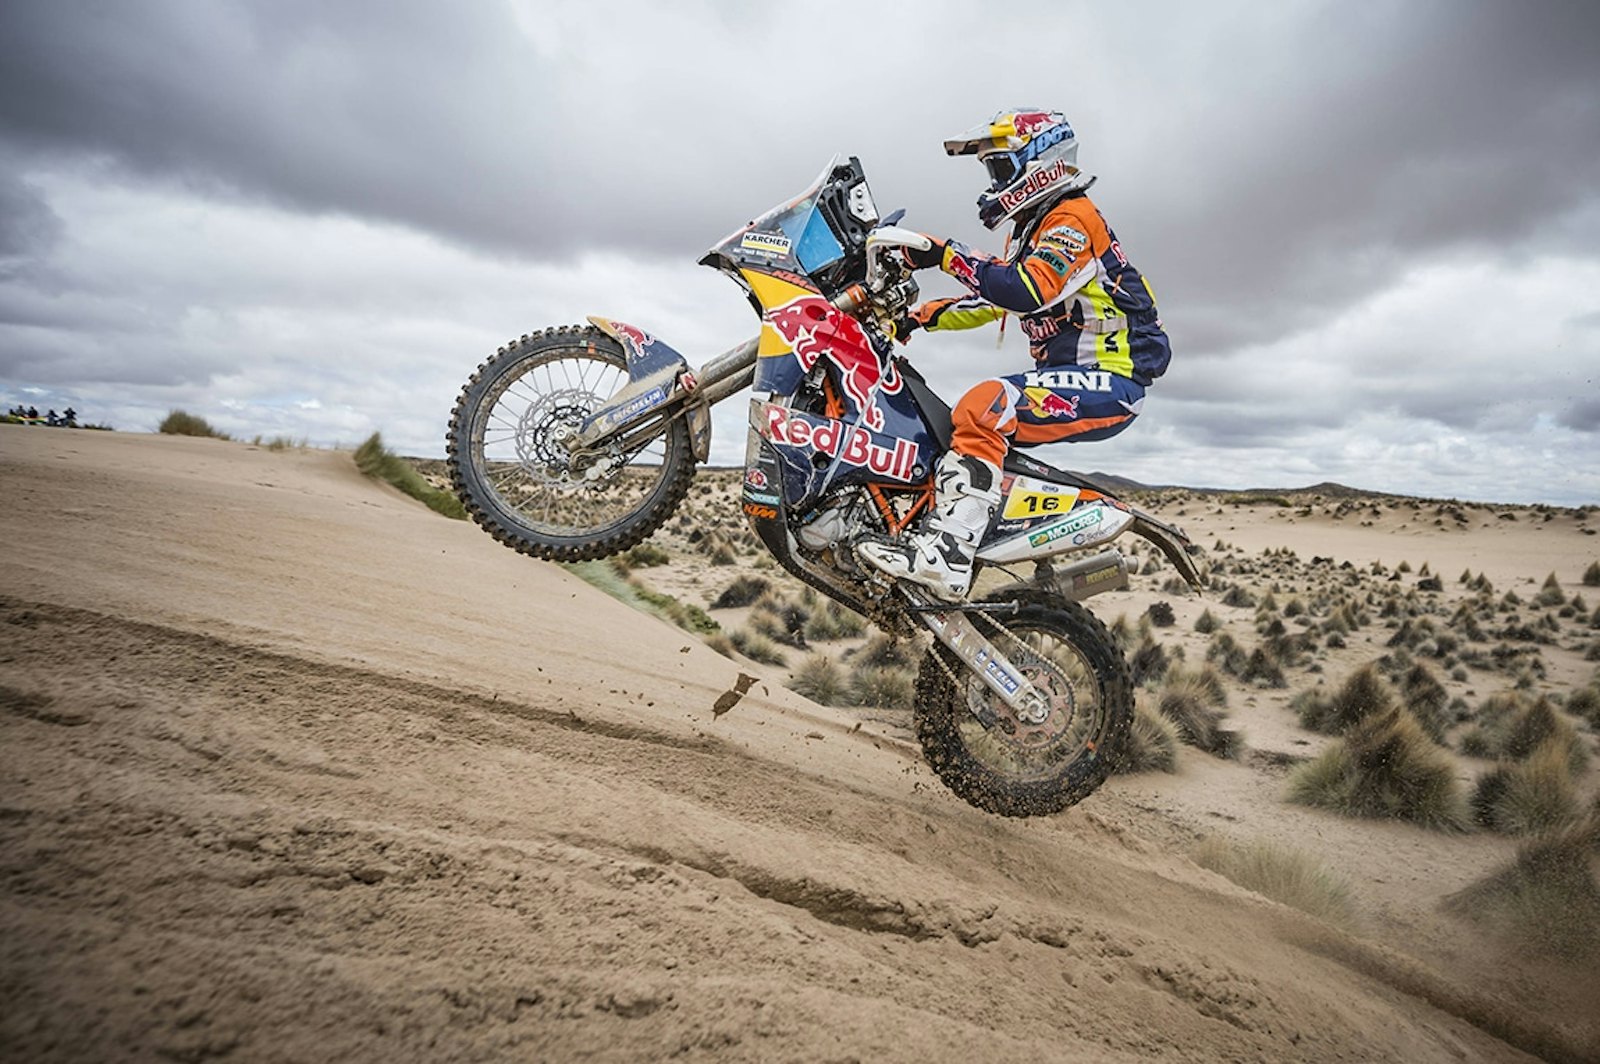 Matthias Walkner (AUT) of Red Bull KTM Factory Team races during stage 07 of Rally Dakar 2017 from La Paz to Uyuni, Bolivia on January 09, 2017 // Marcelo Maragni/Red Bull Content Pool // P-20170109-01362 // Usage for editorial use only // Please go to www.redbullcontentpool.com for further information. //